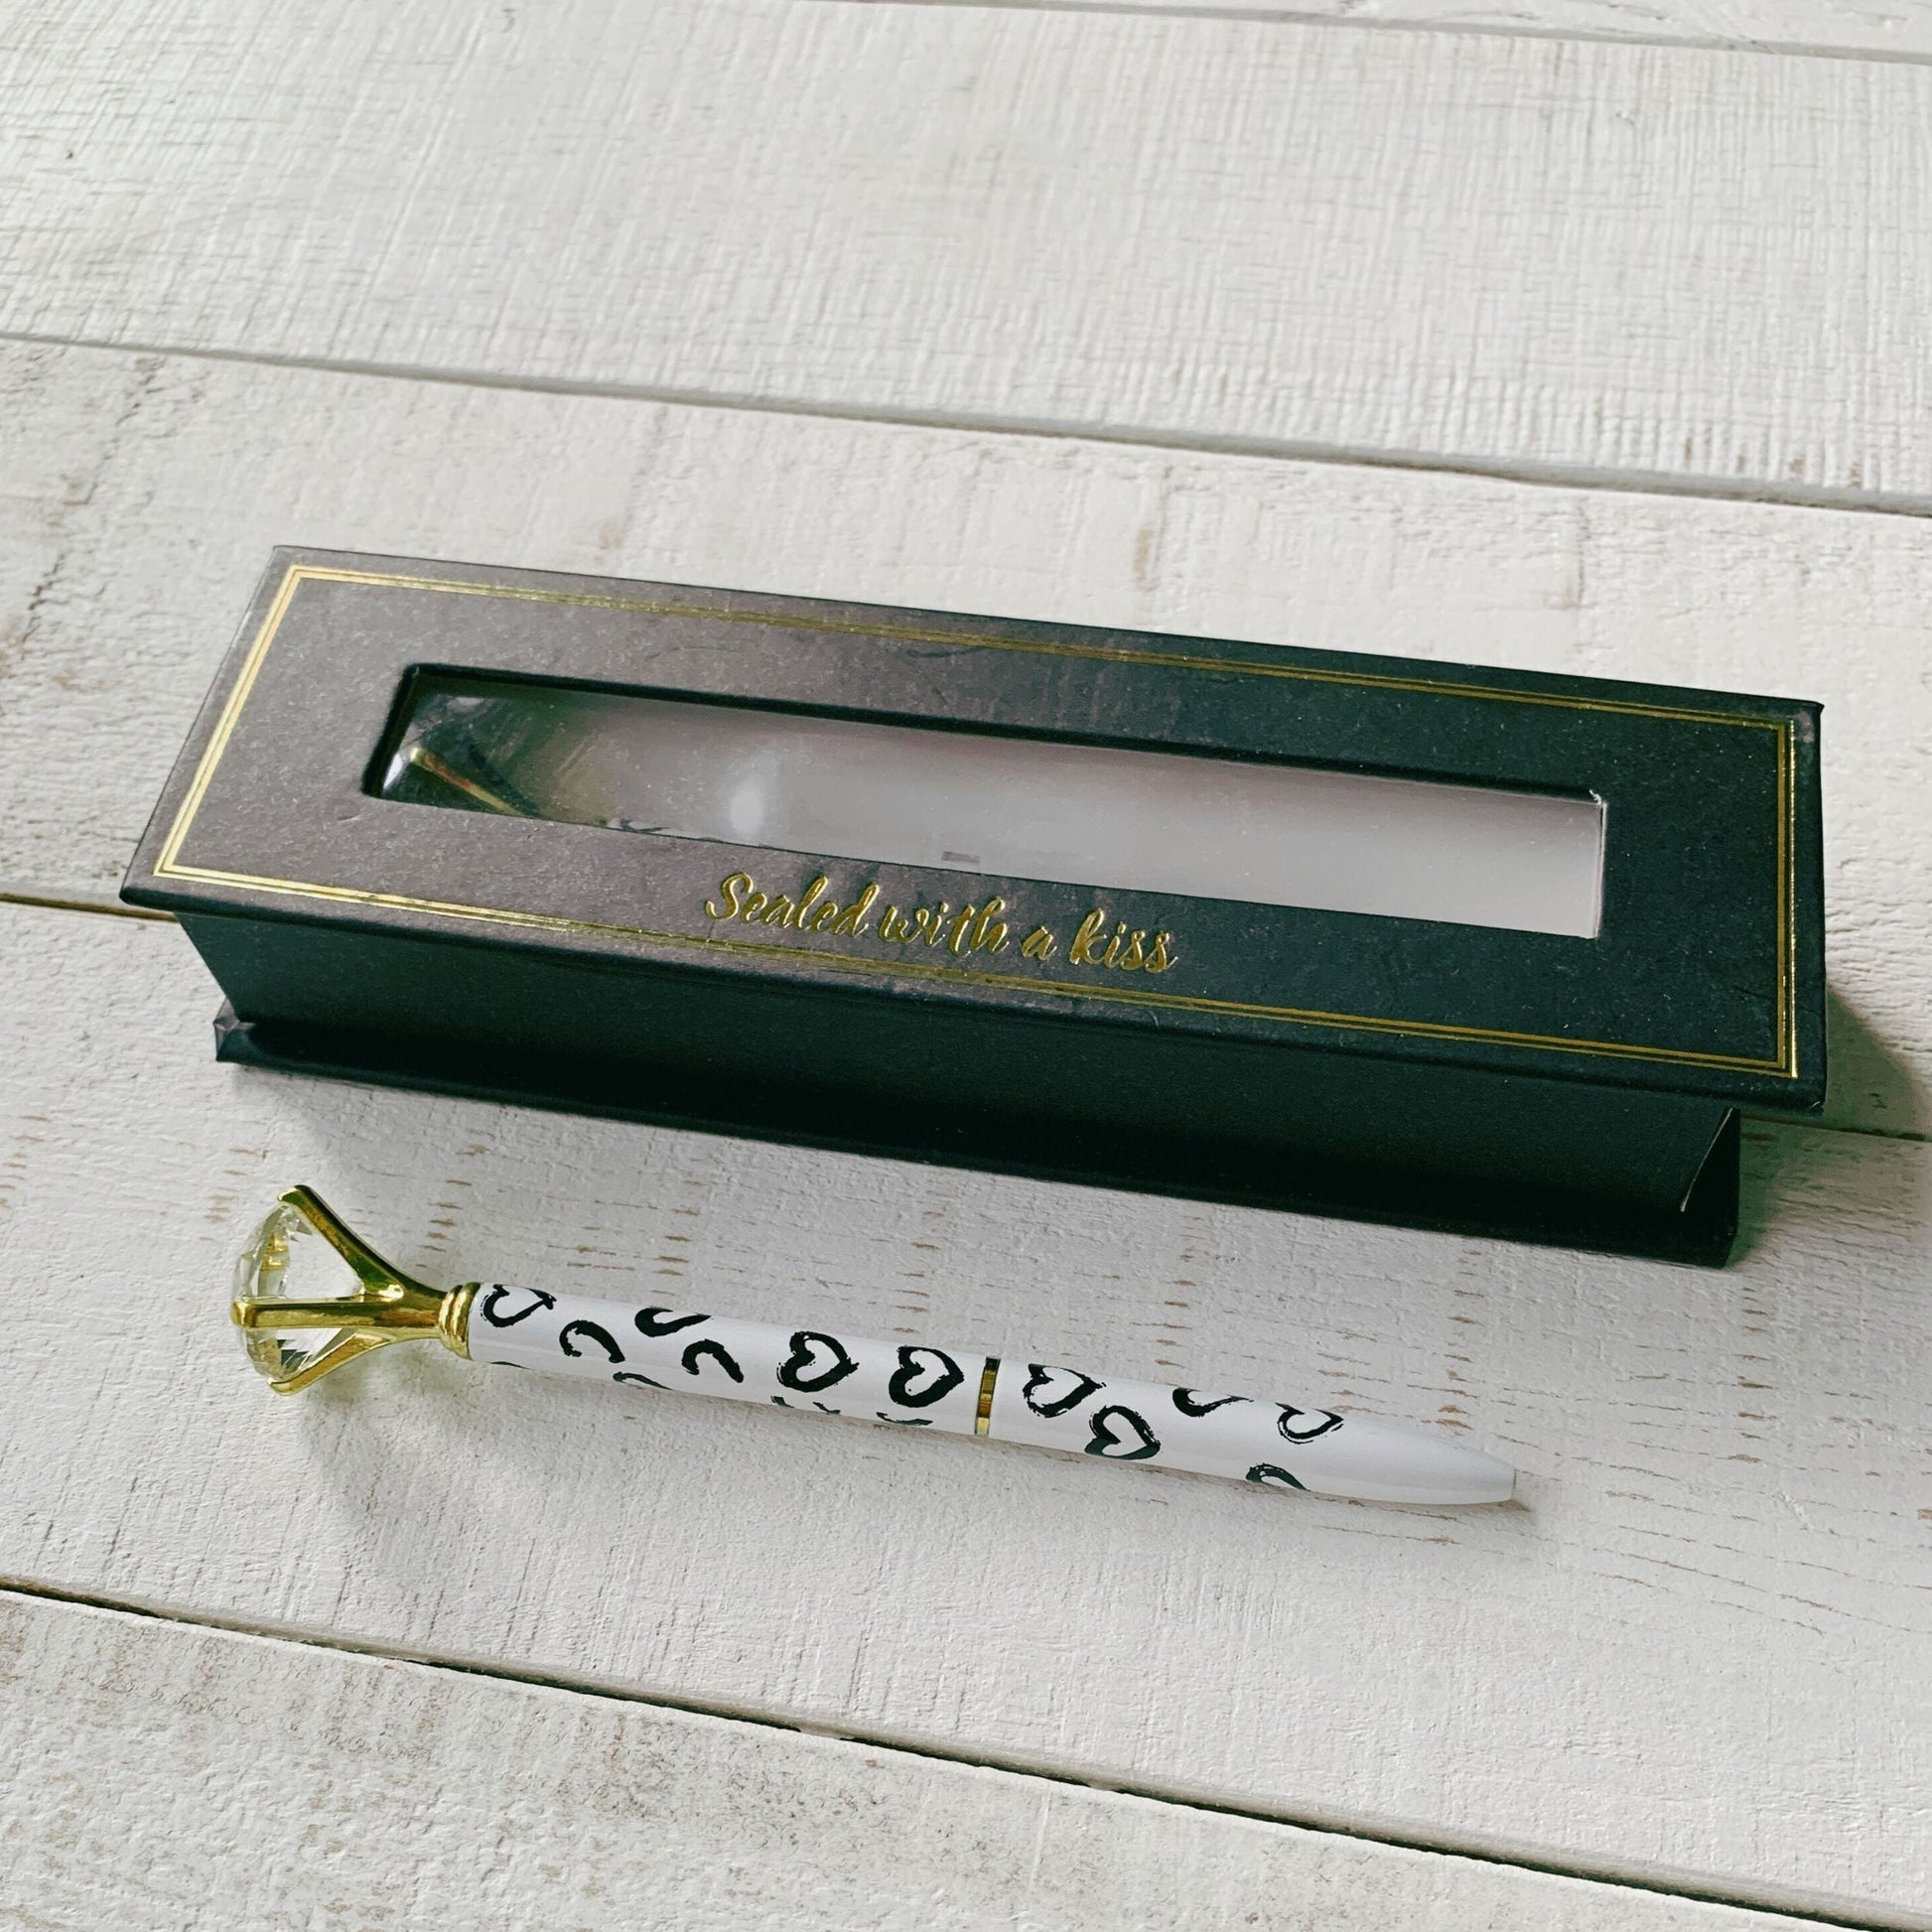 Heart Gem Pen in Gift Box | Jewel-Topped Gift Pen | Box Reads "Sealed with a Kiss"